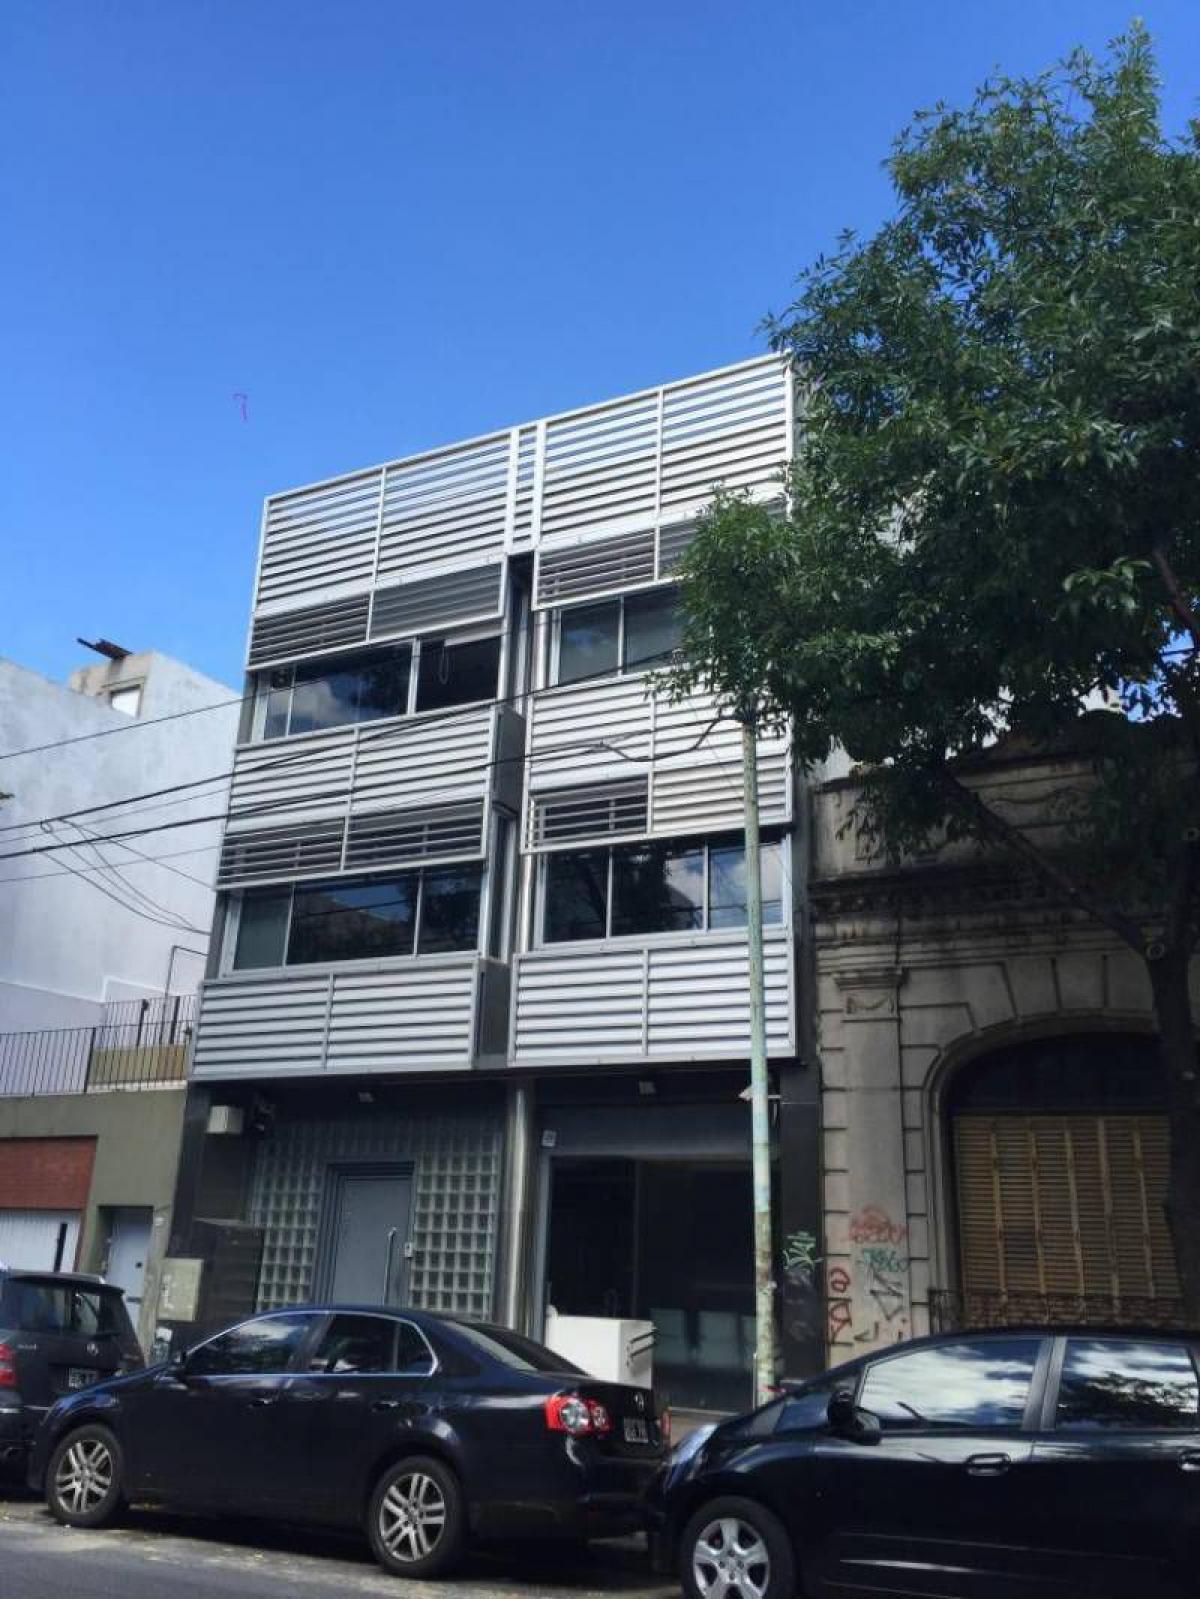 Picture of Apartment Building For Sale in Palermo, Distrito Federal, Argentina